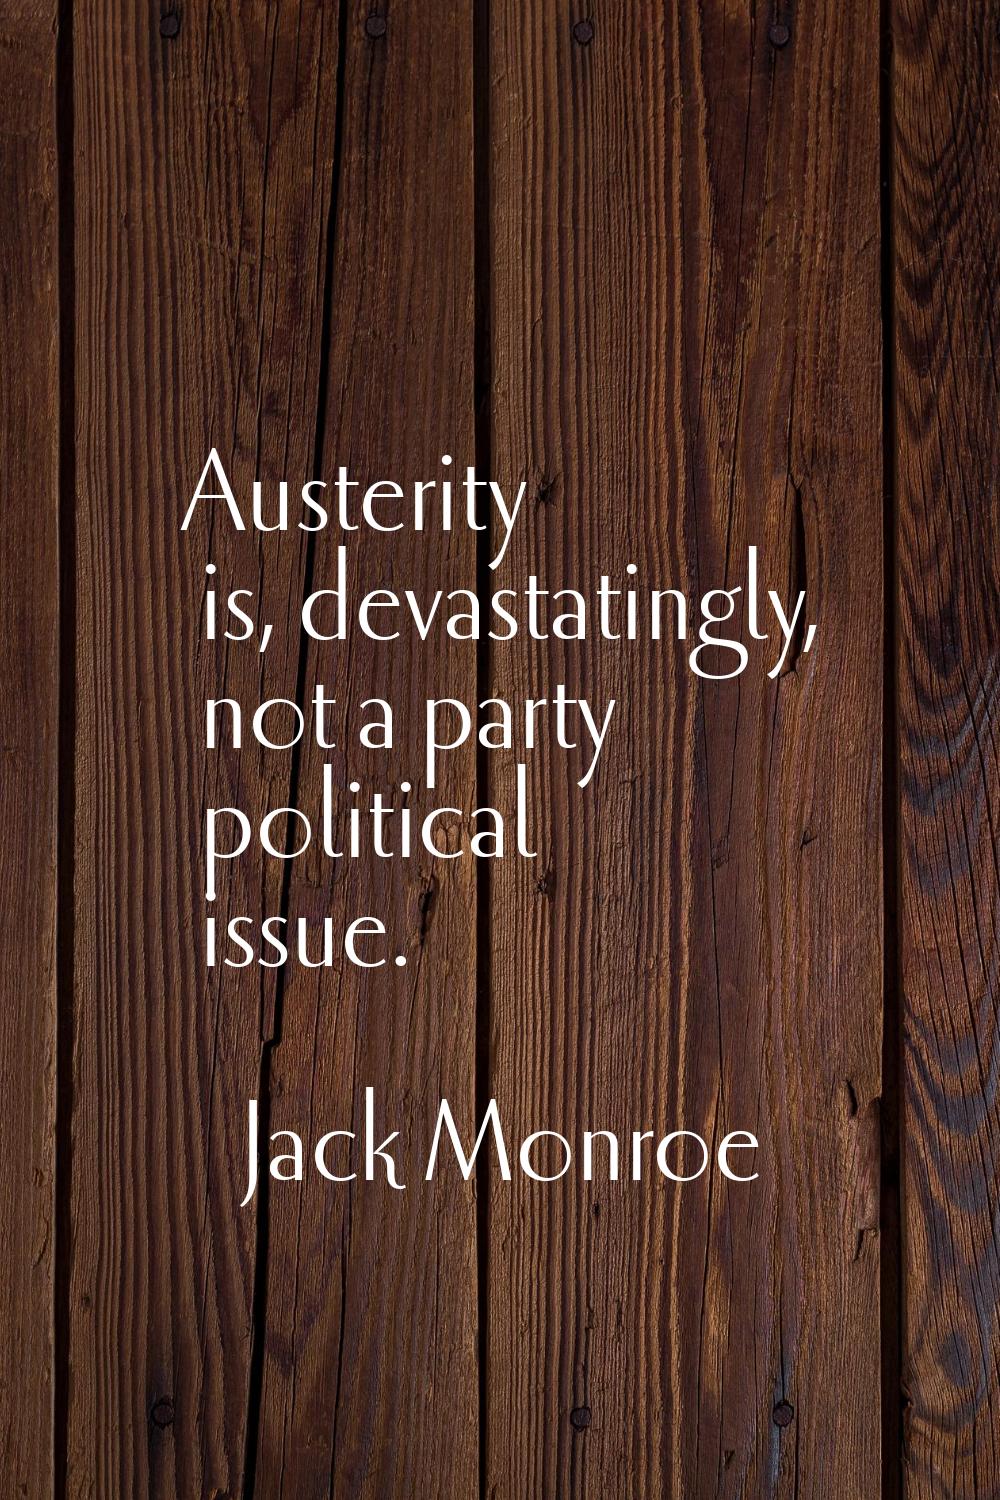 Austerity is, devastatingly, not a party political issue.